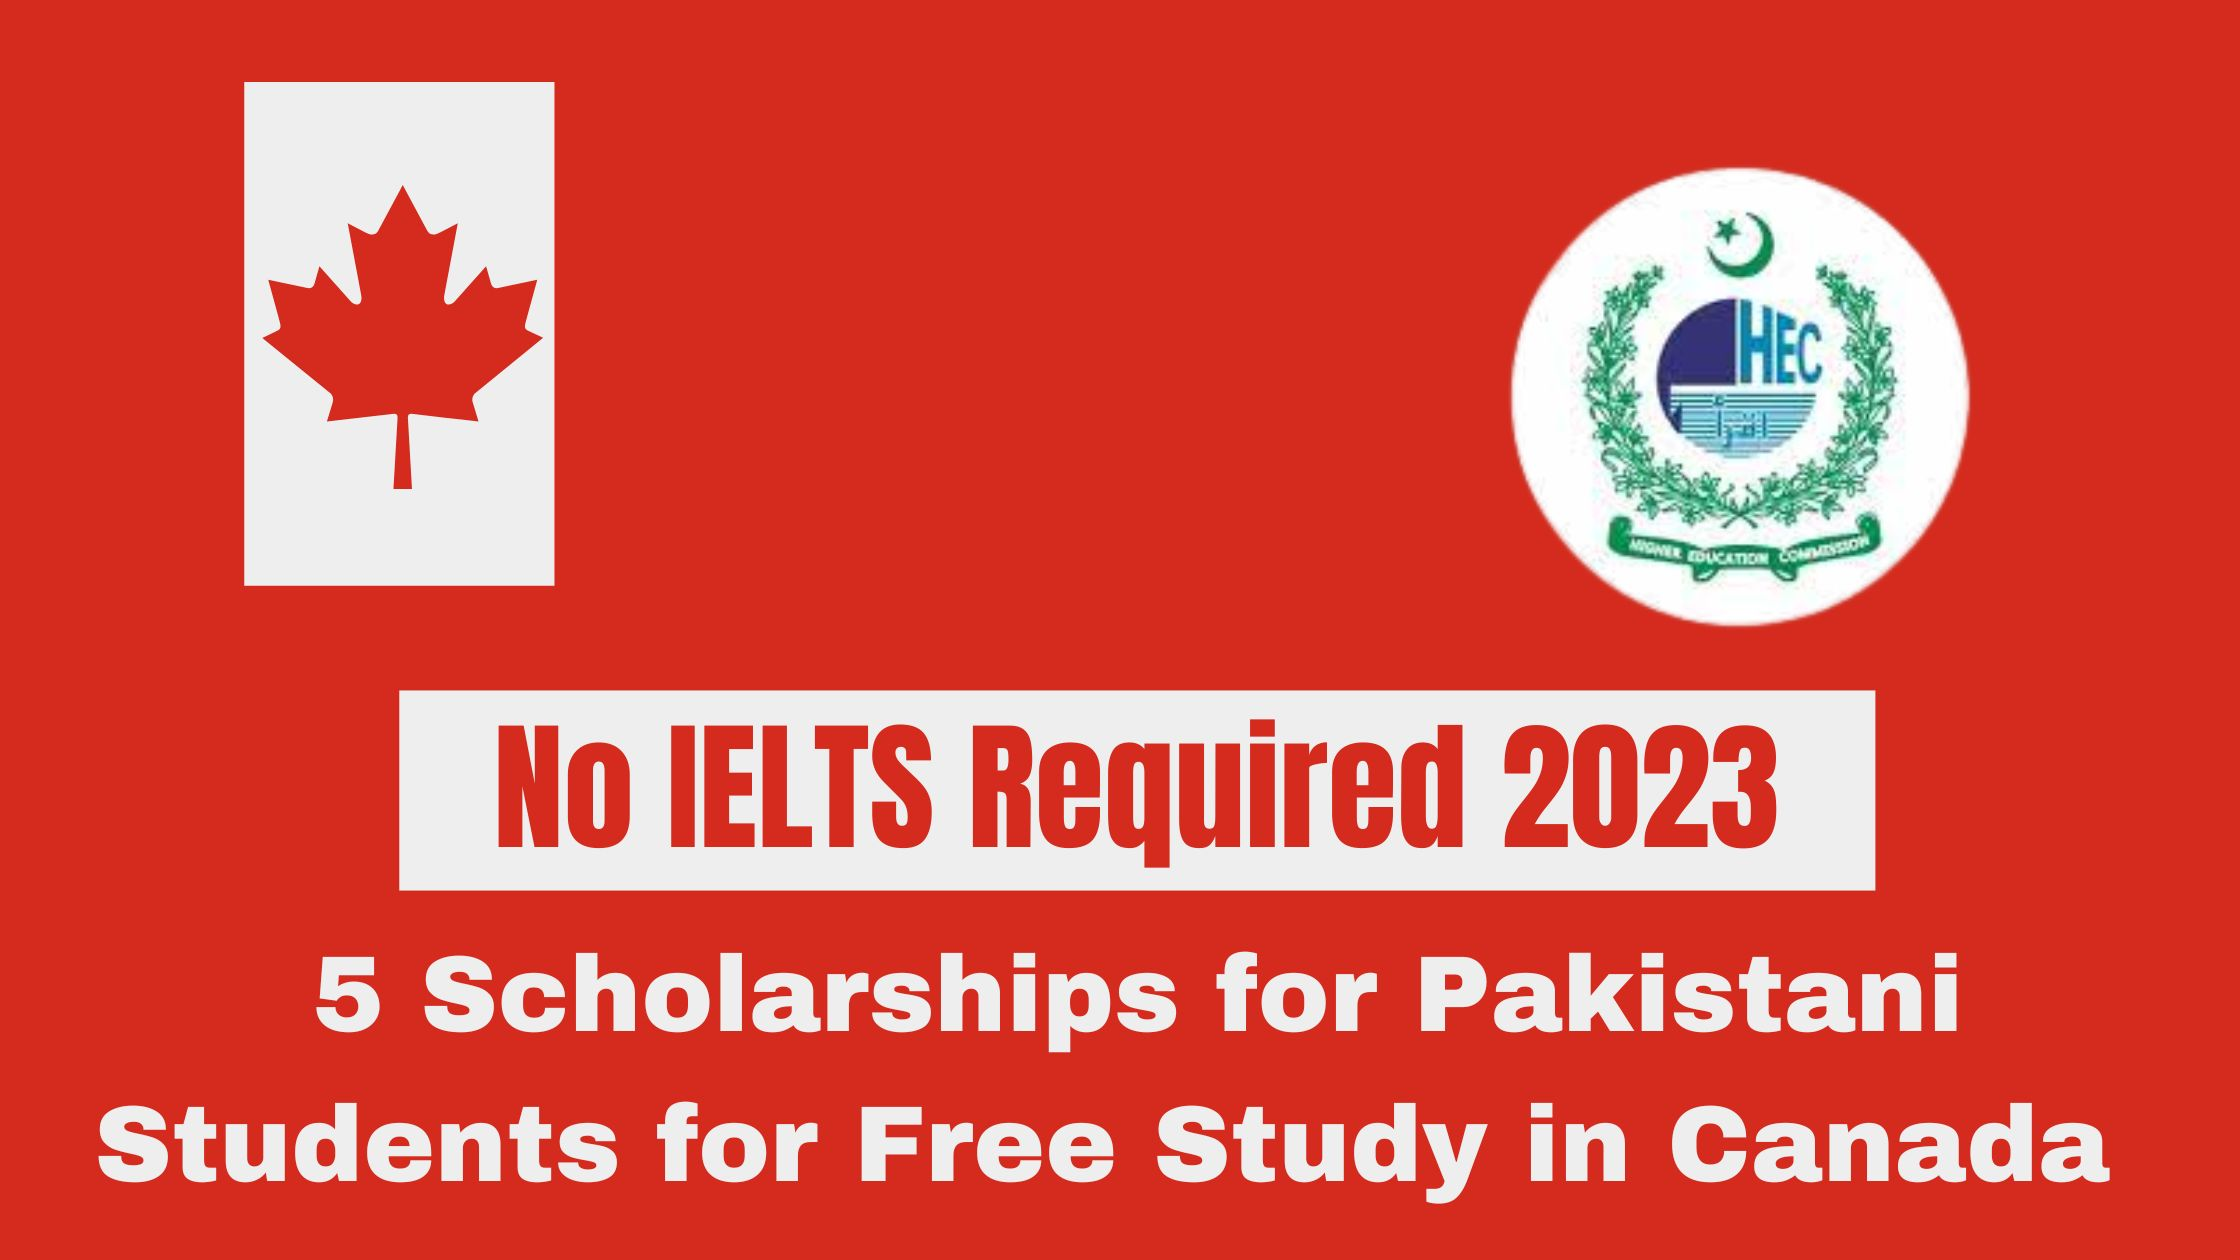 5 Scholarships for Pakistani Students for Free Study in Canada, No IELTS Required 2023